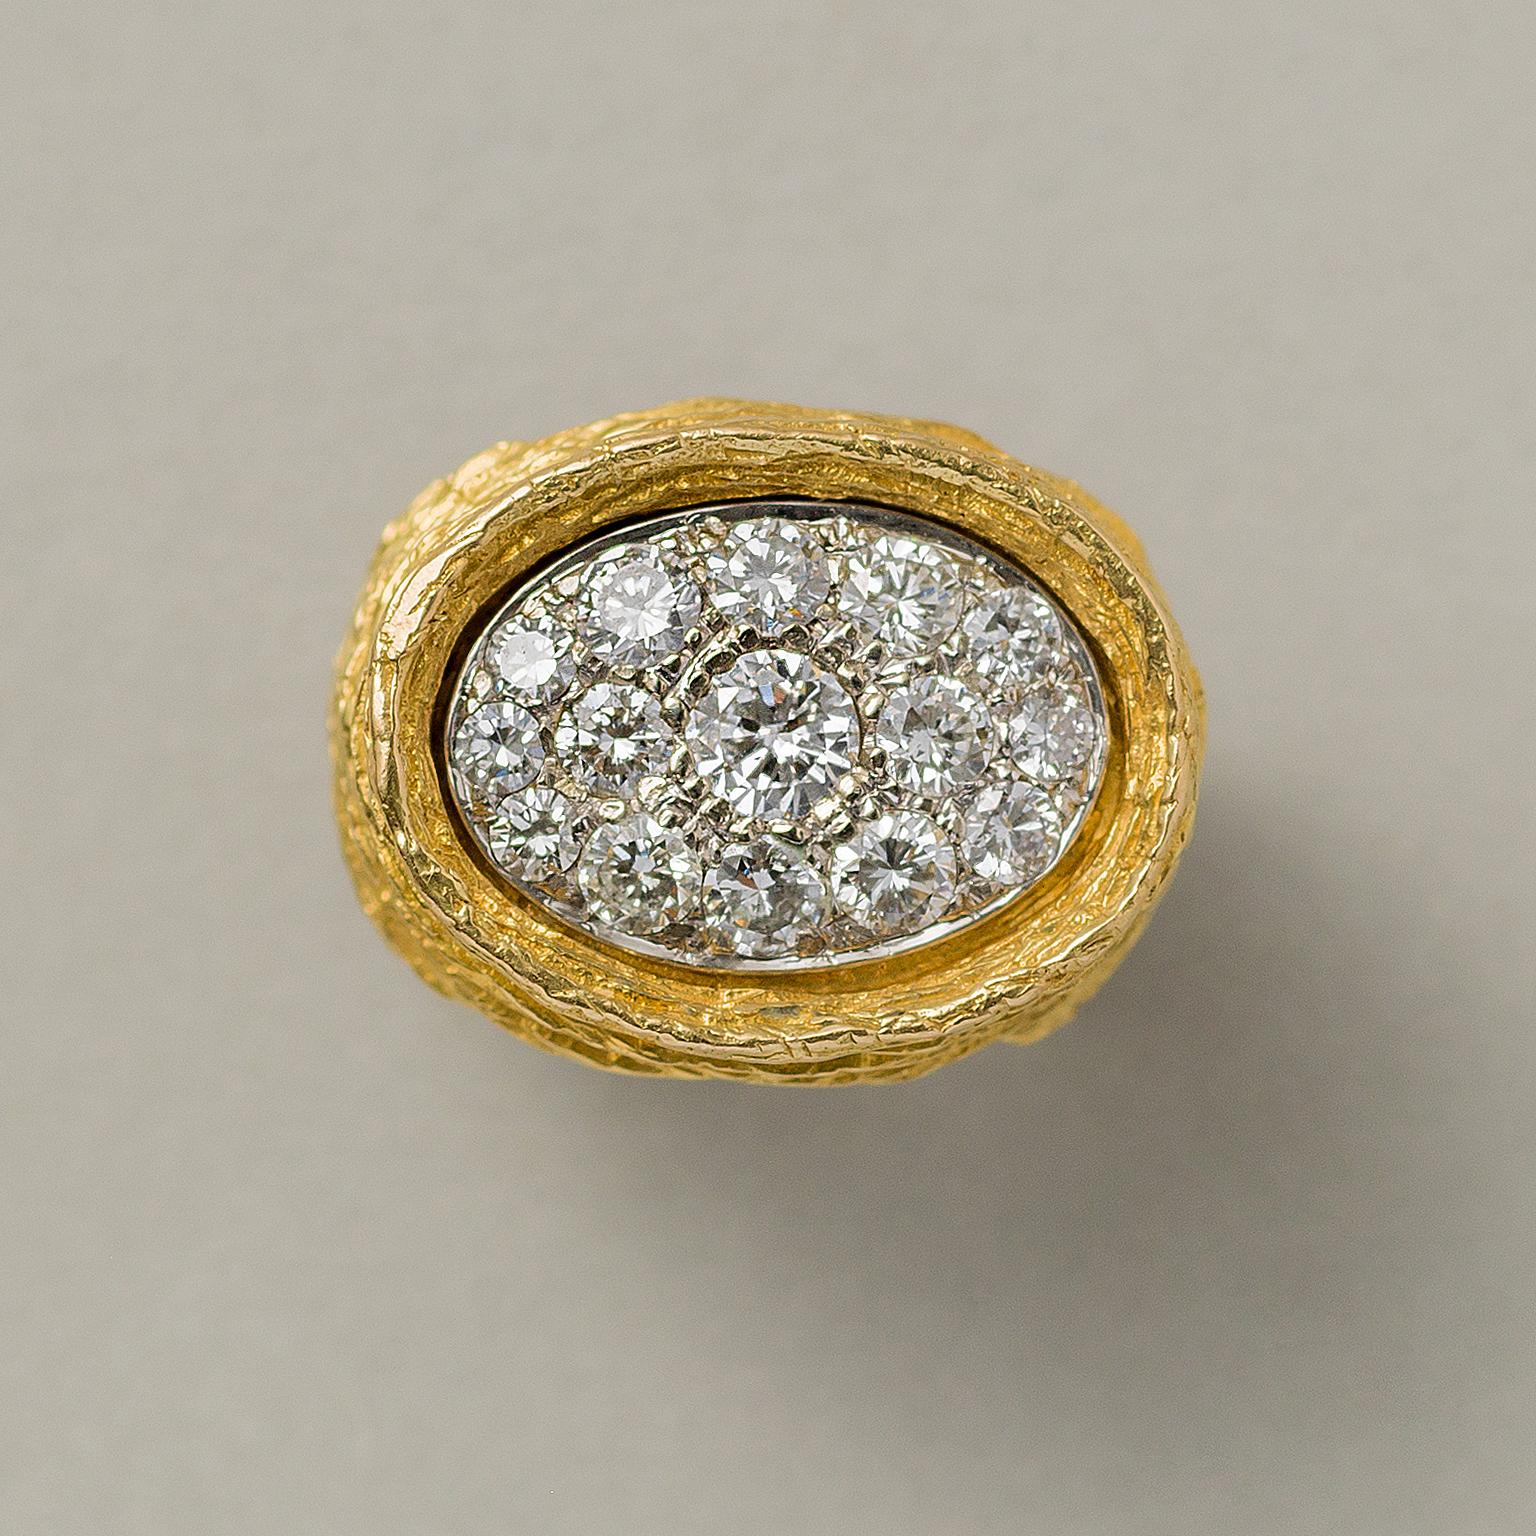 An 18 carat gold and diamond ring, the front view is a large oval horizontally set over the finger pavé set with diamonds in white gold, nested in a higher yellow gold border which is part of shank with the curved horizontal ribs with texture,